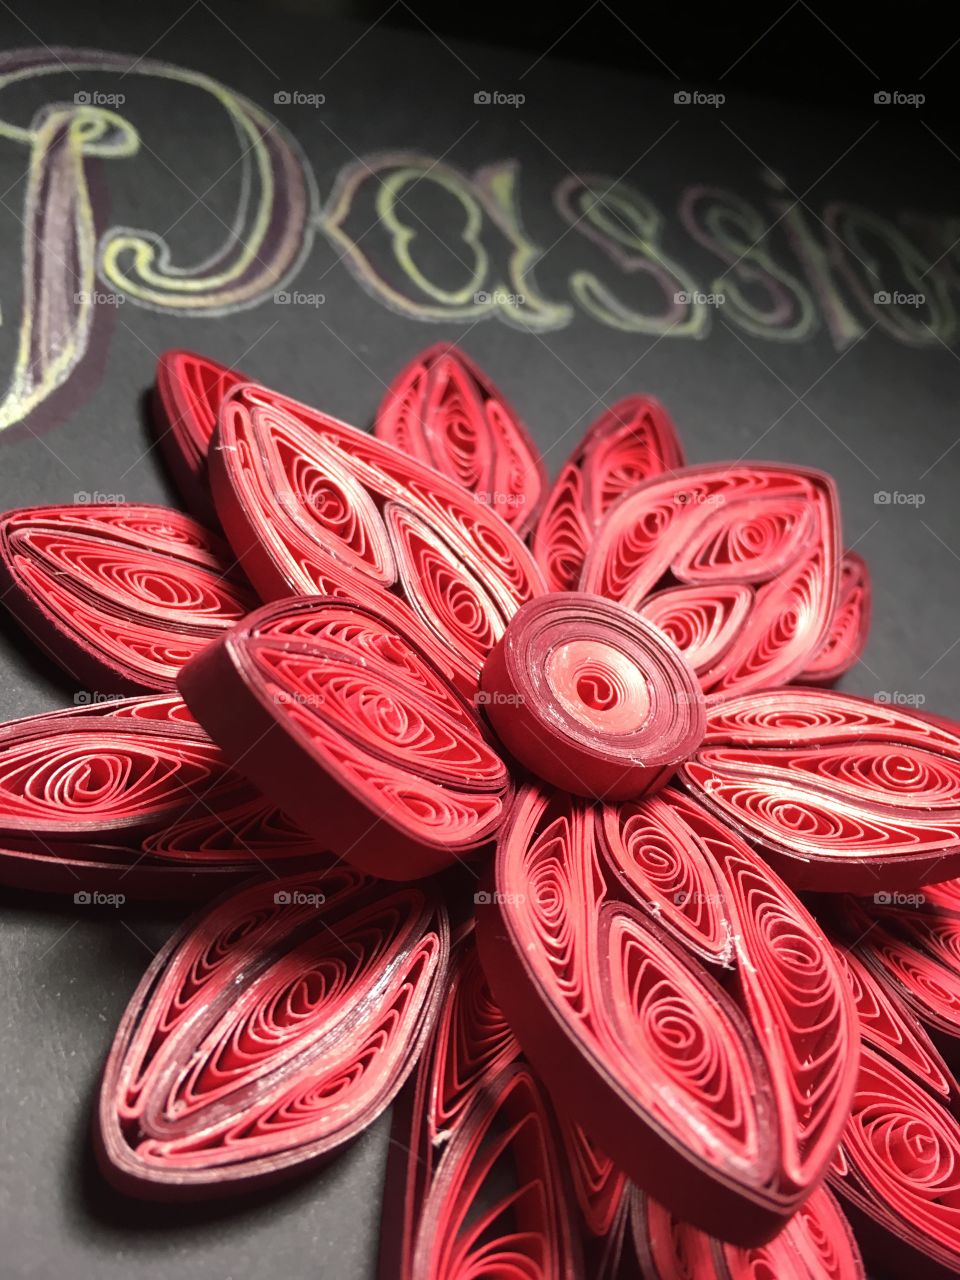 Flower made with quilling paper